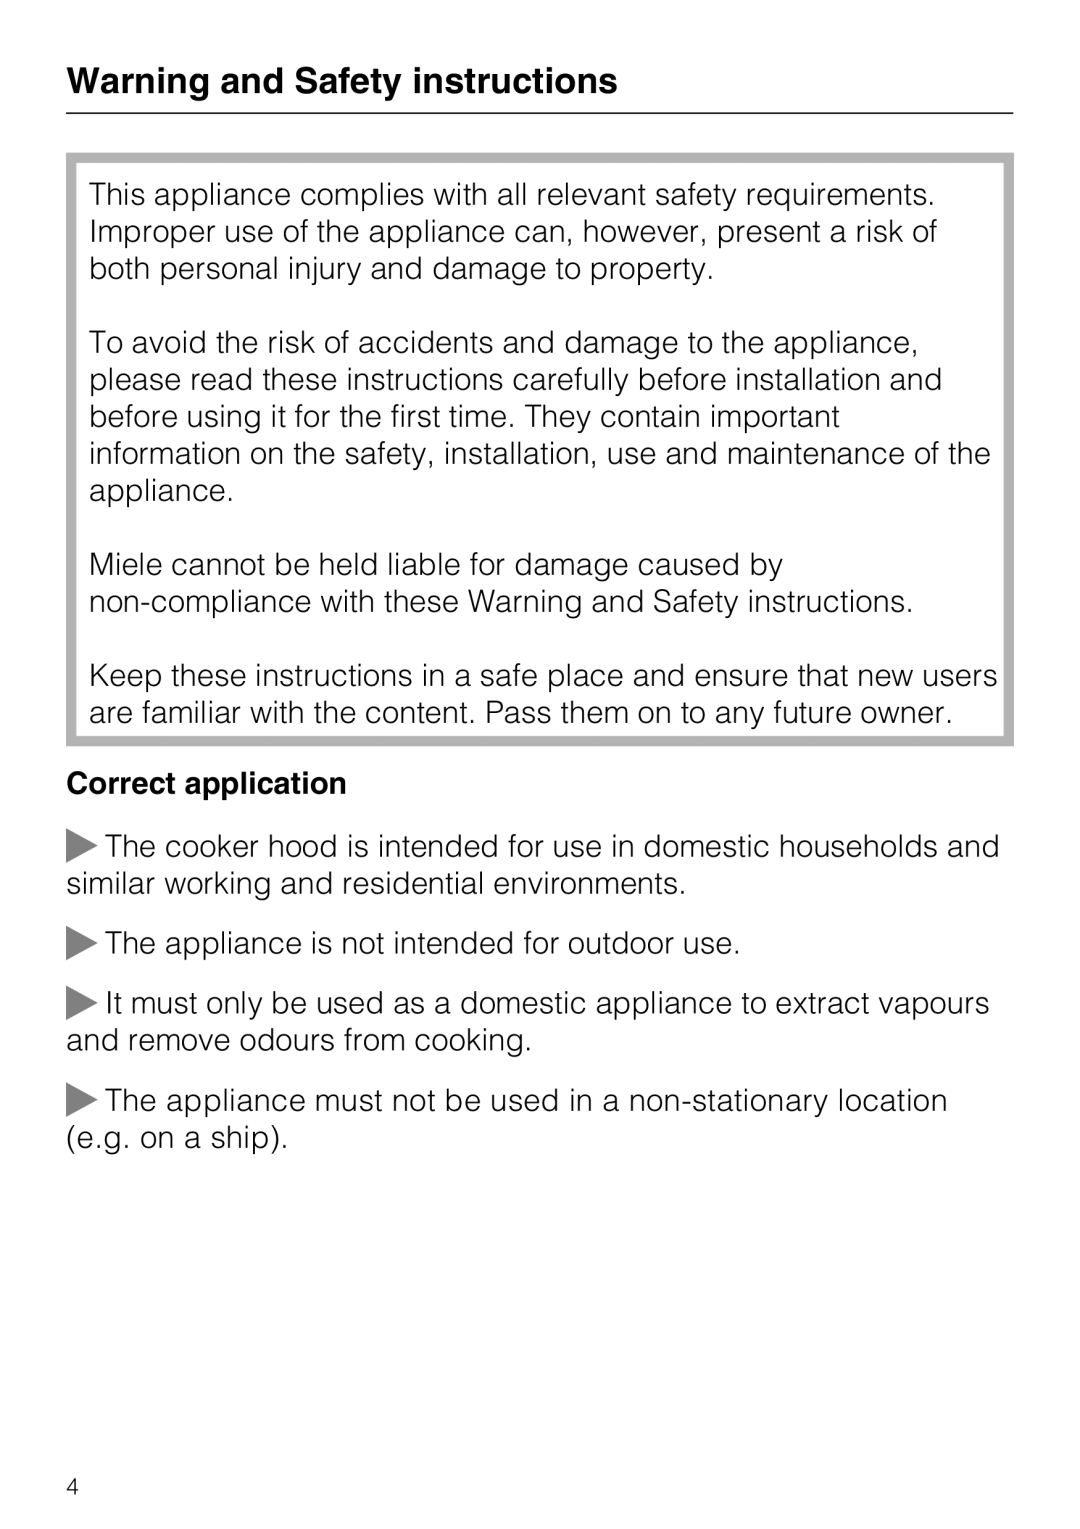 Miele 09 730 840 installation instructions Warning and Safety instructions, Correct application 